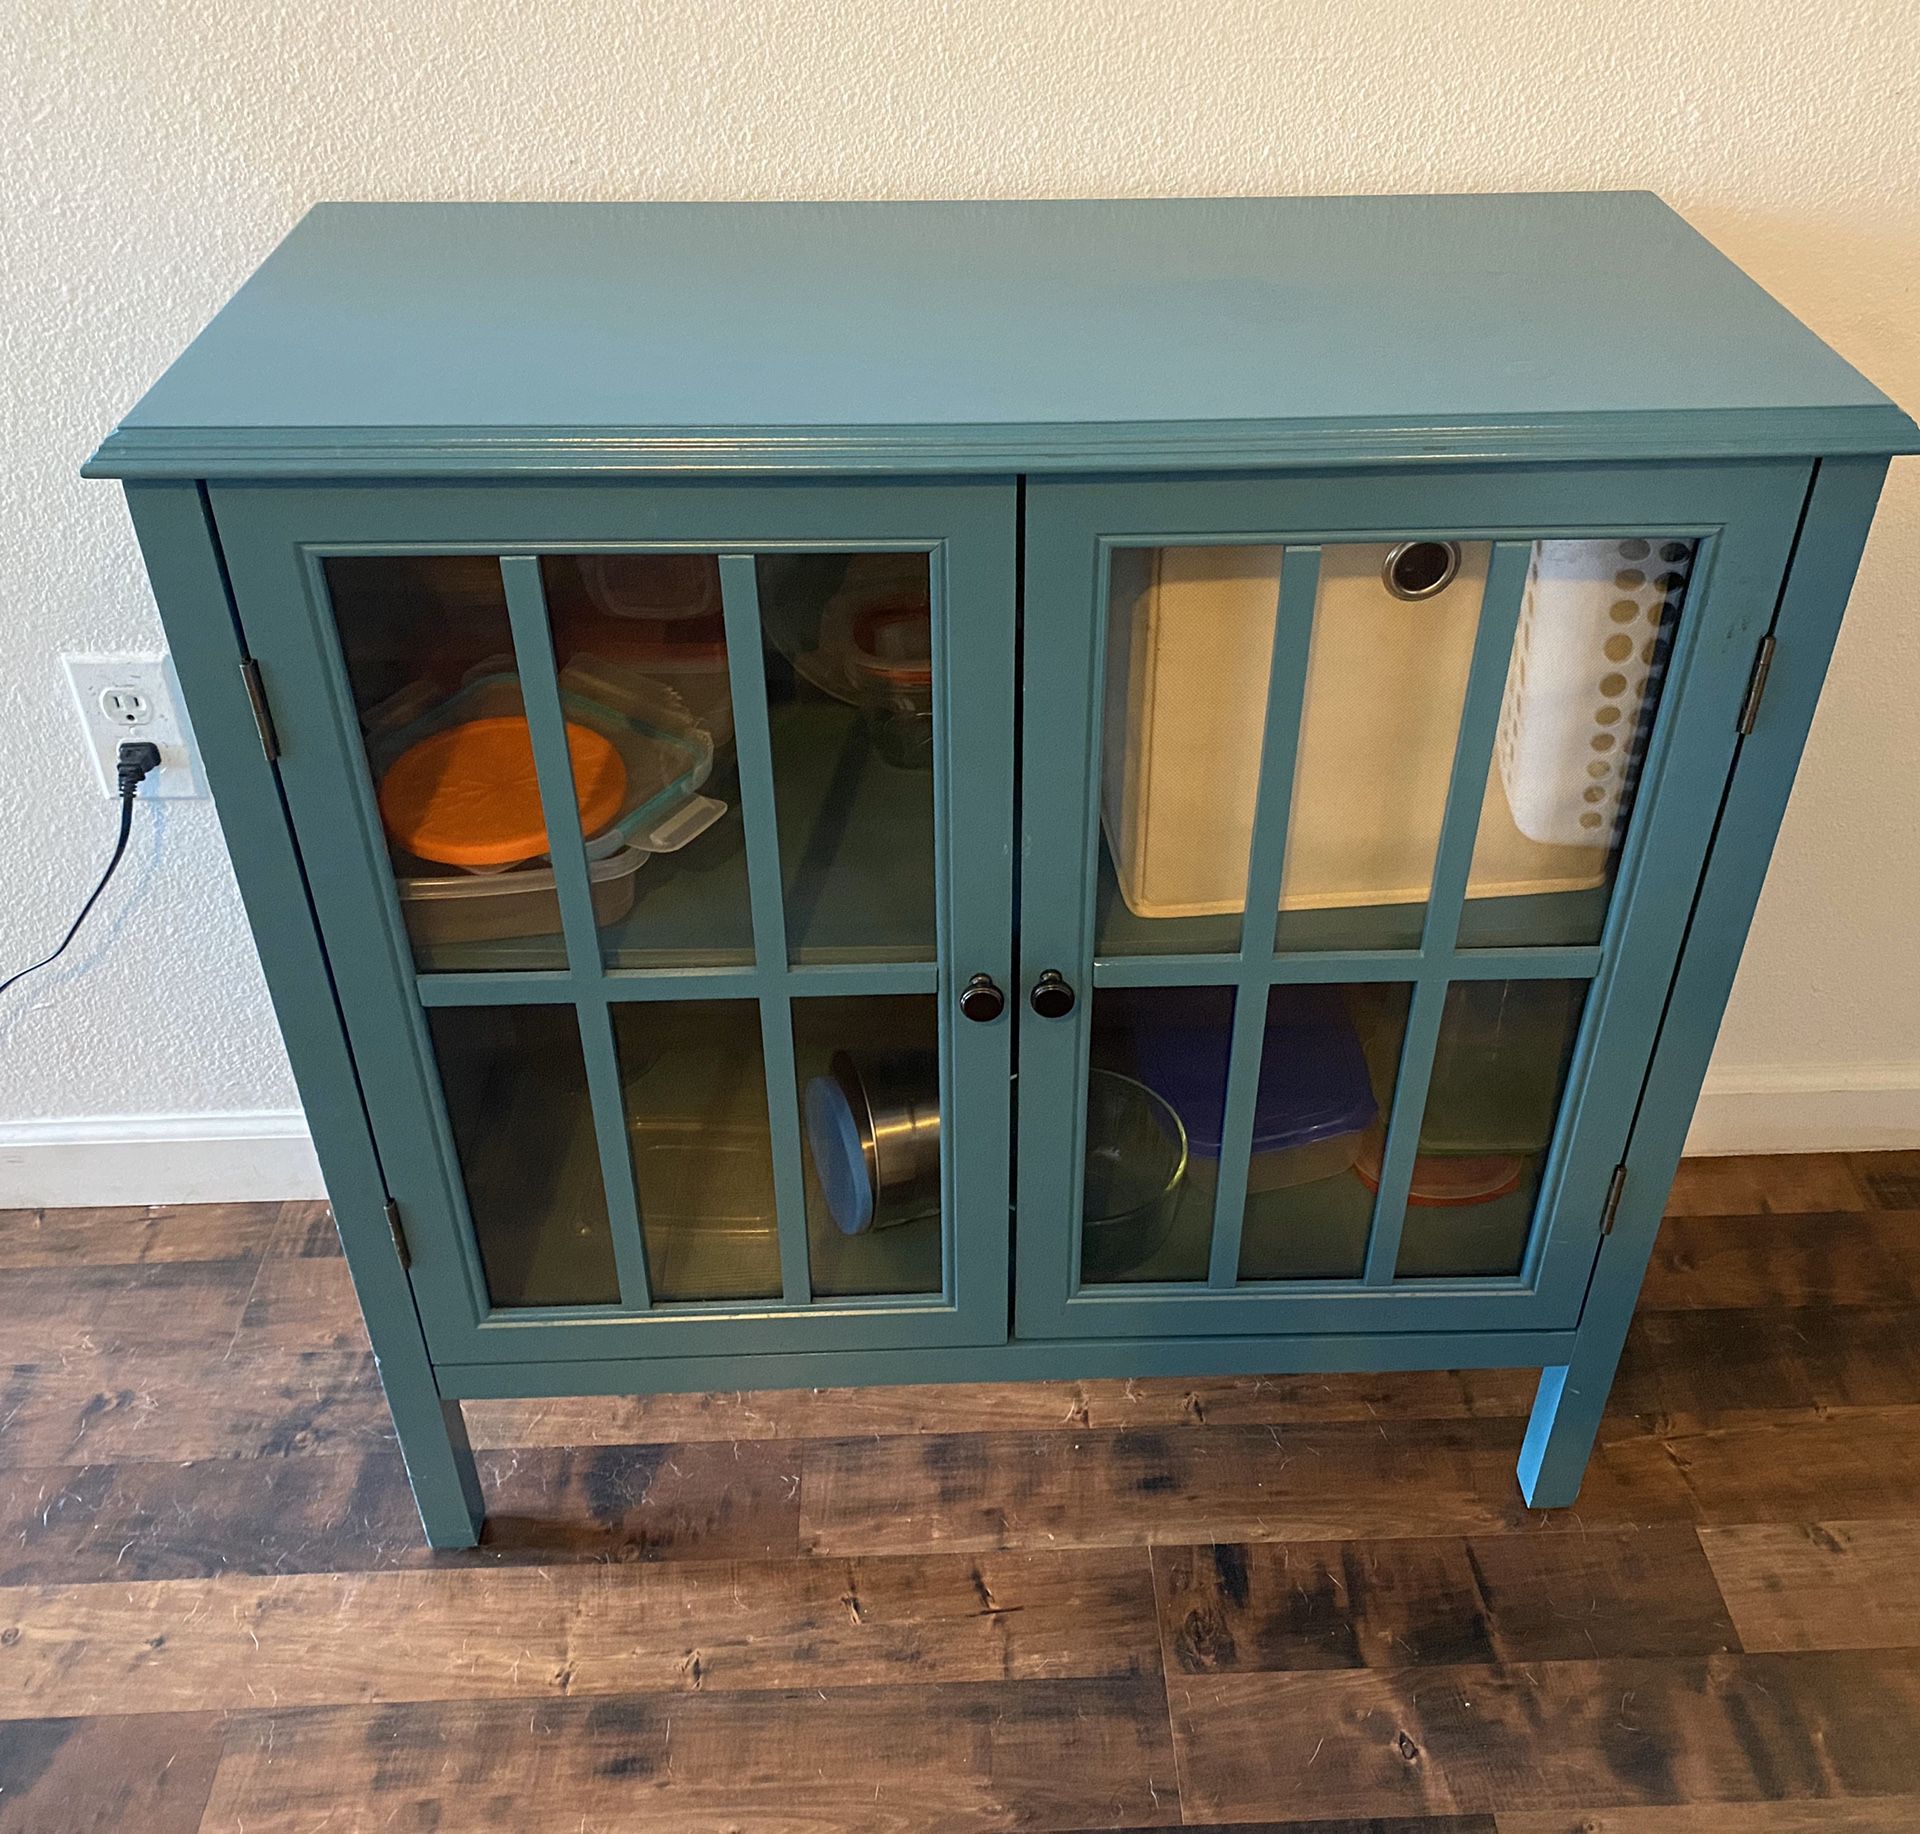 Two door accent cabinet from Target - Teal Blue